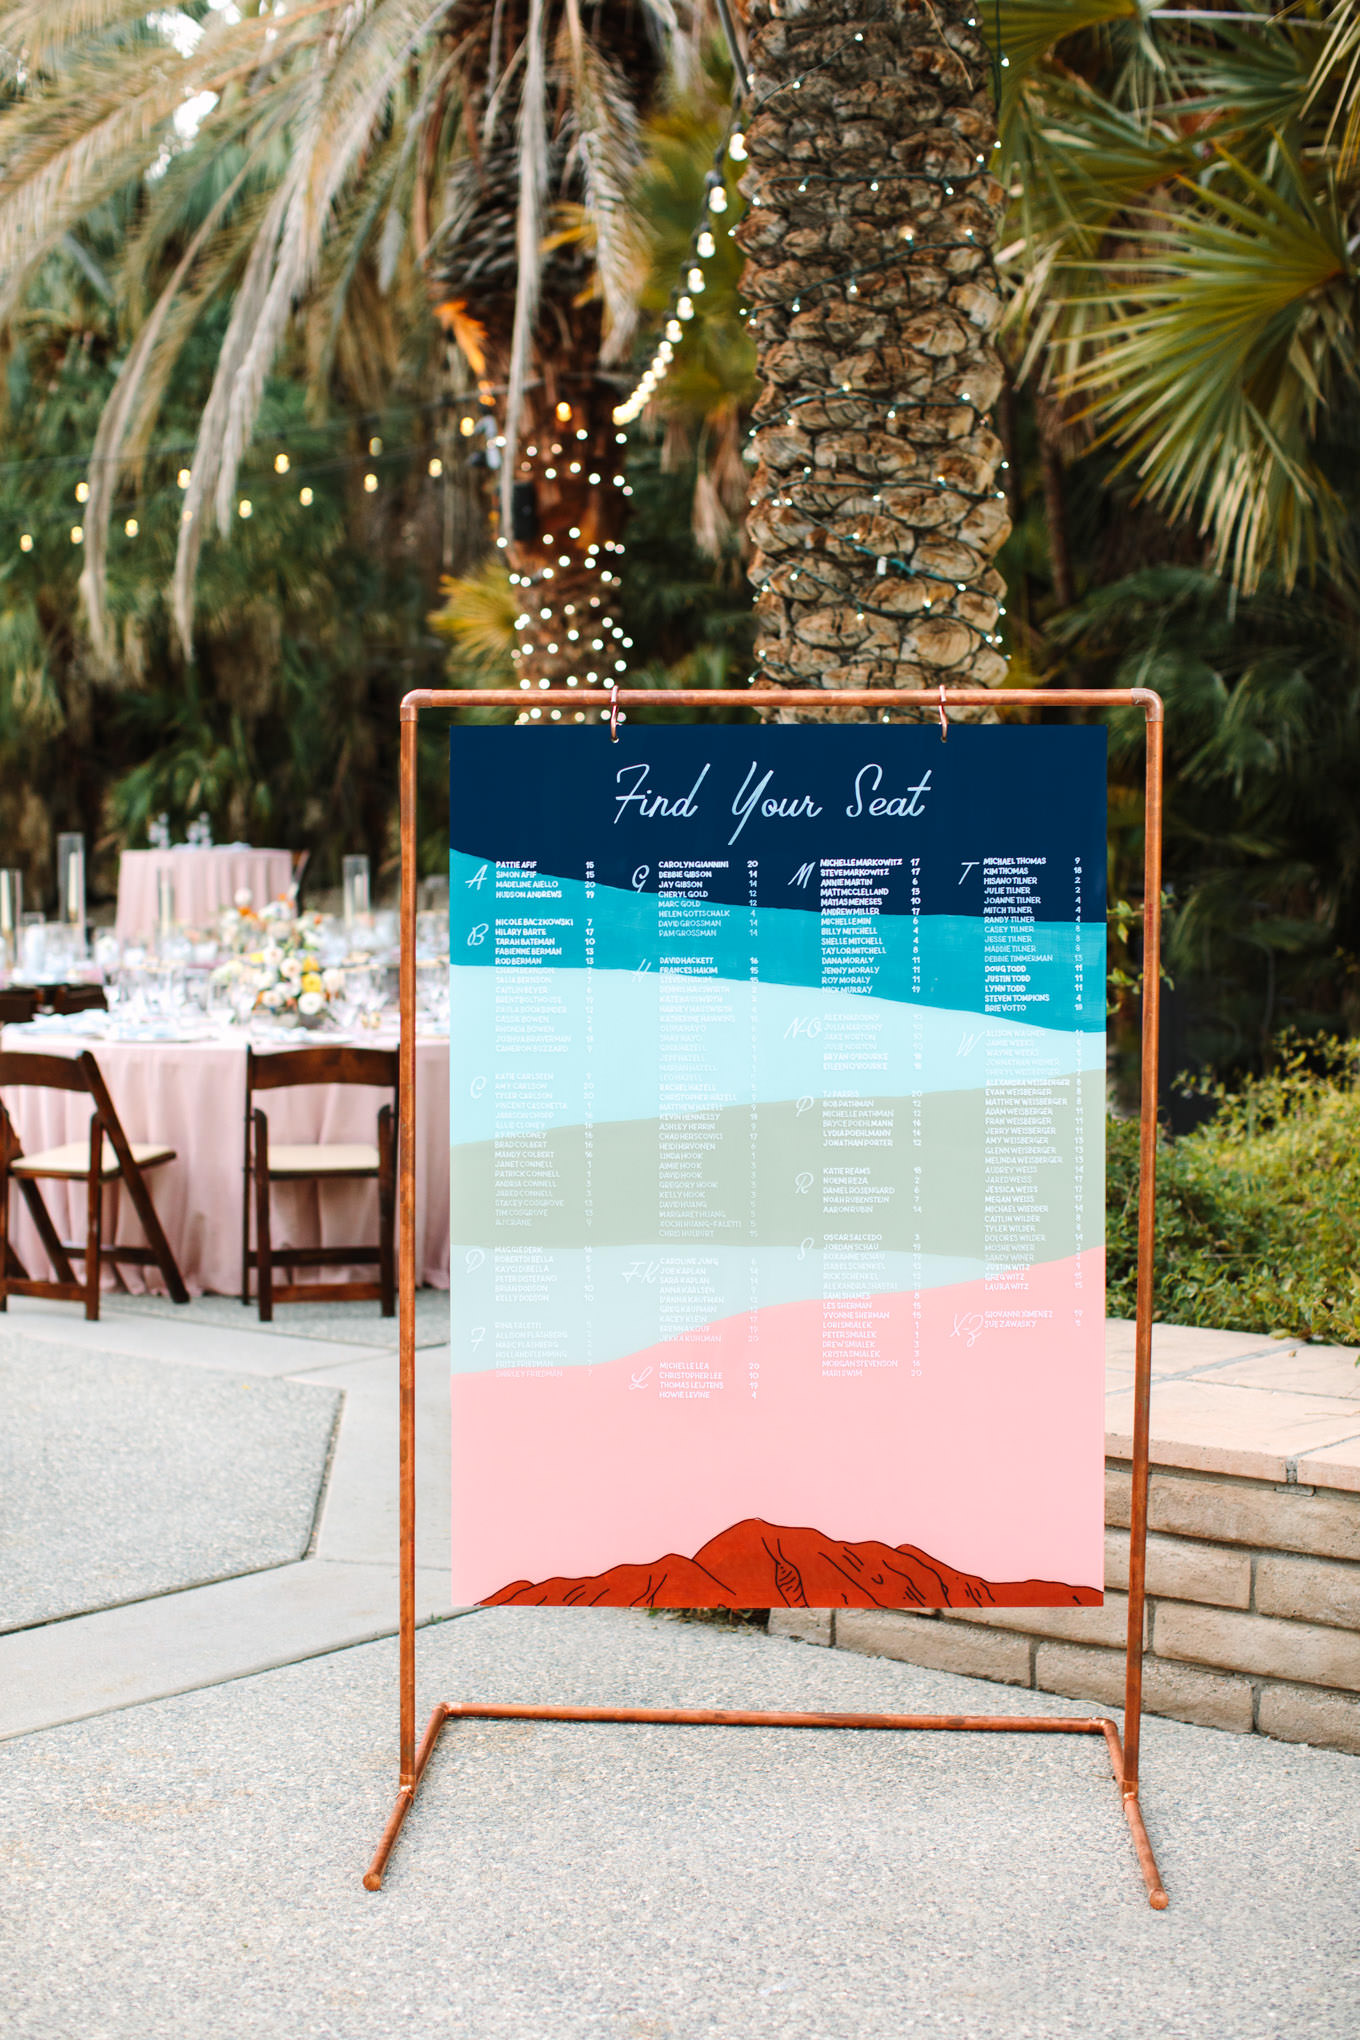 Seating chart at Living Desert Zoo wedding | Engagement, elopement, and wedding photography roundup of Mary Costa’s favorite images from 2020 | Colorful and elevated photography for fun-loving couples in Southern California | #2020wedding #elopement #weddingphoto #weddingphotography   Source: Mary Costa Photography | Los Angeles